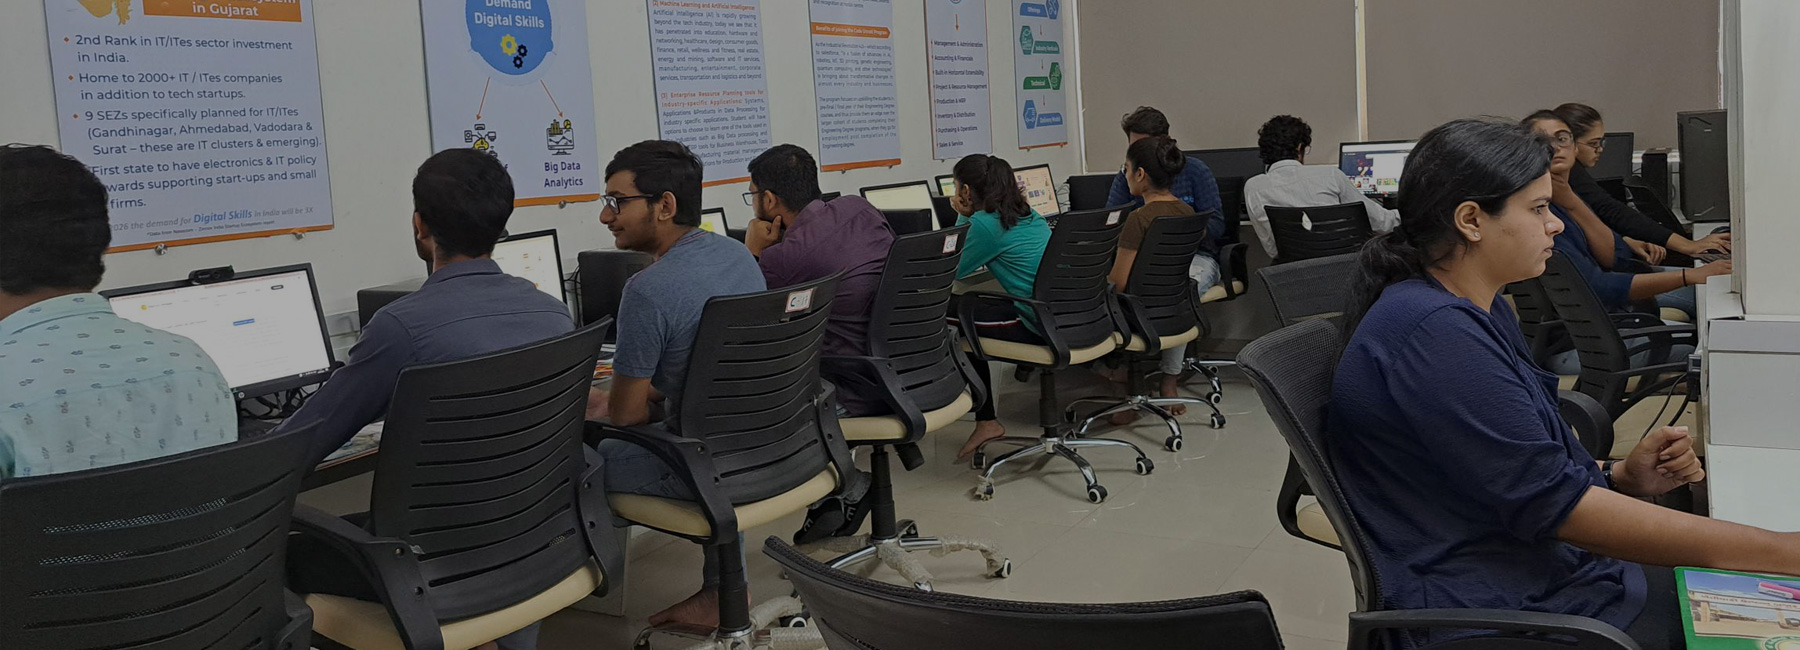 Students attending a lab session at one of the Centres of Excellence in Gujarat